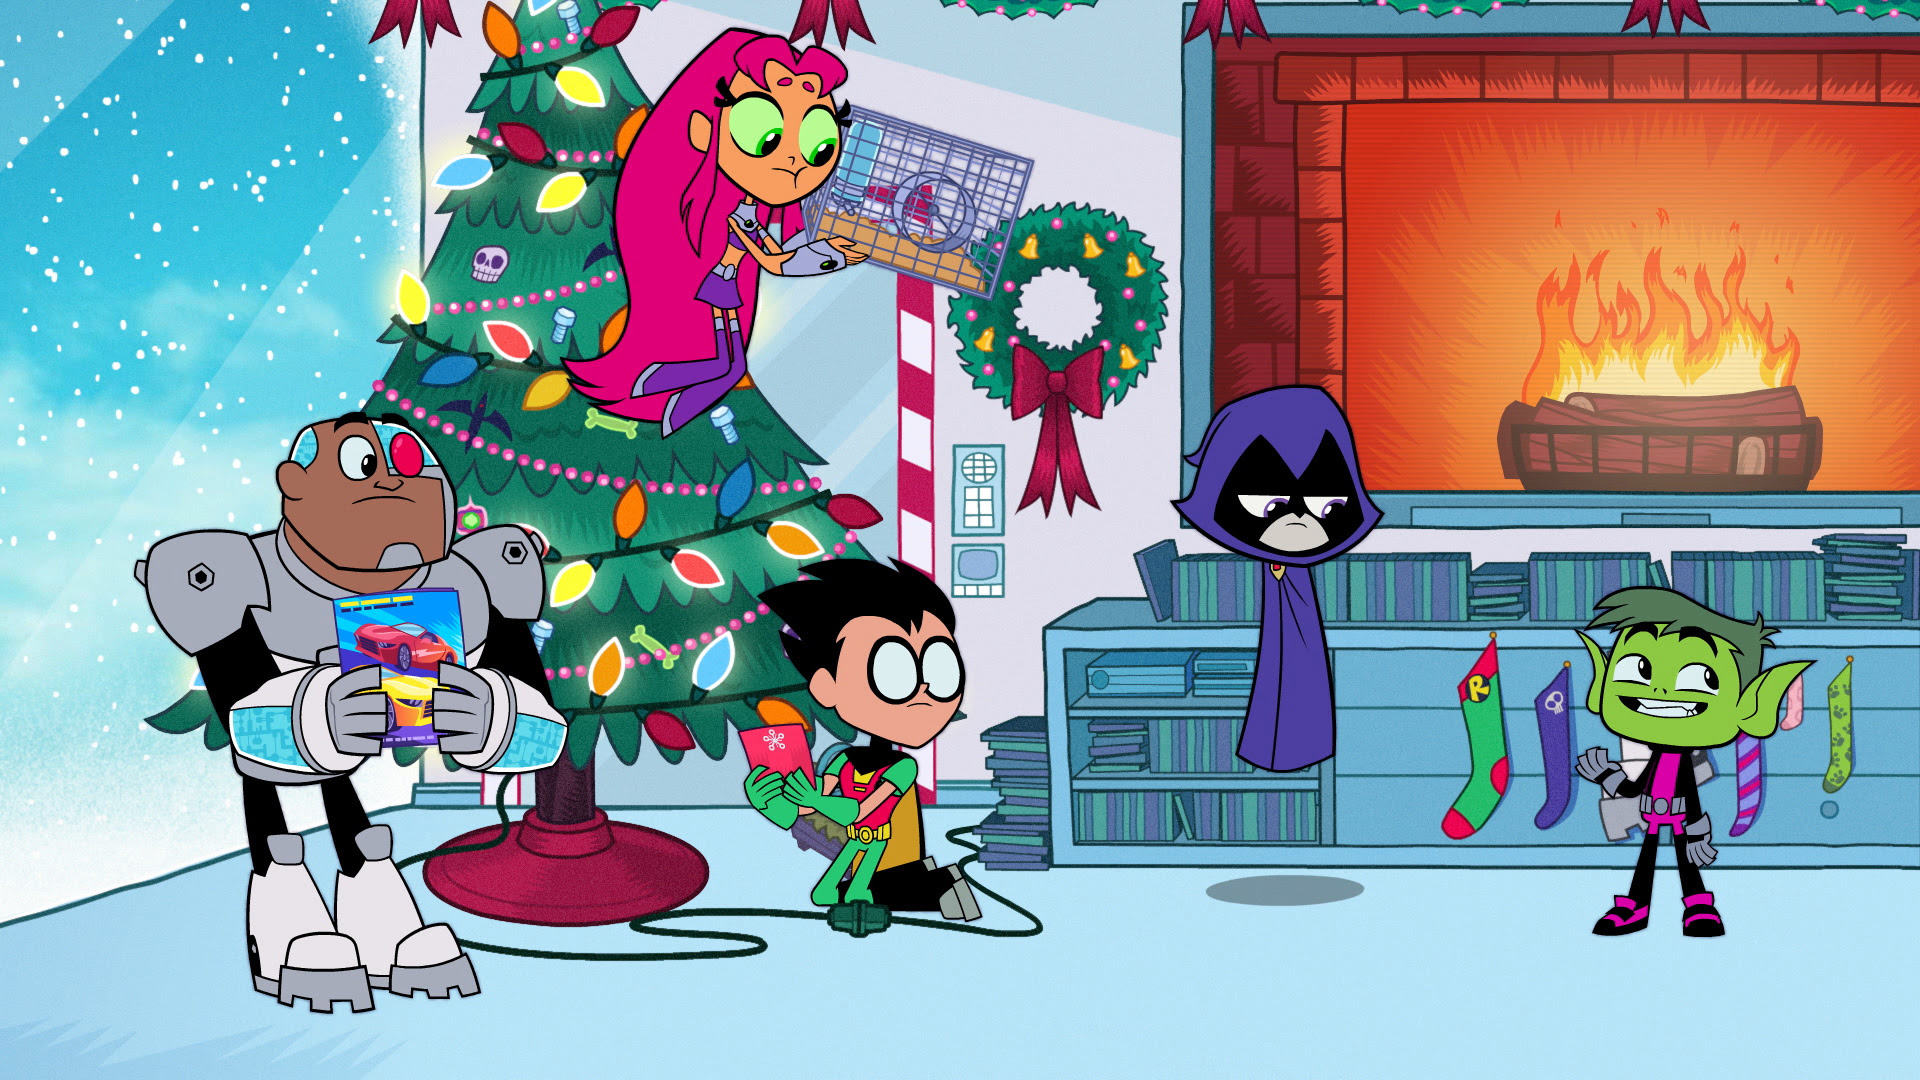 Kidscreen » Archive » Cartoon Network pops out another Gumball season